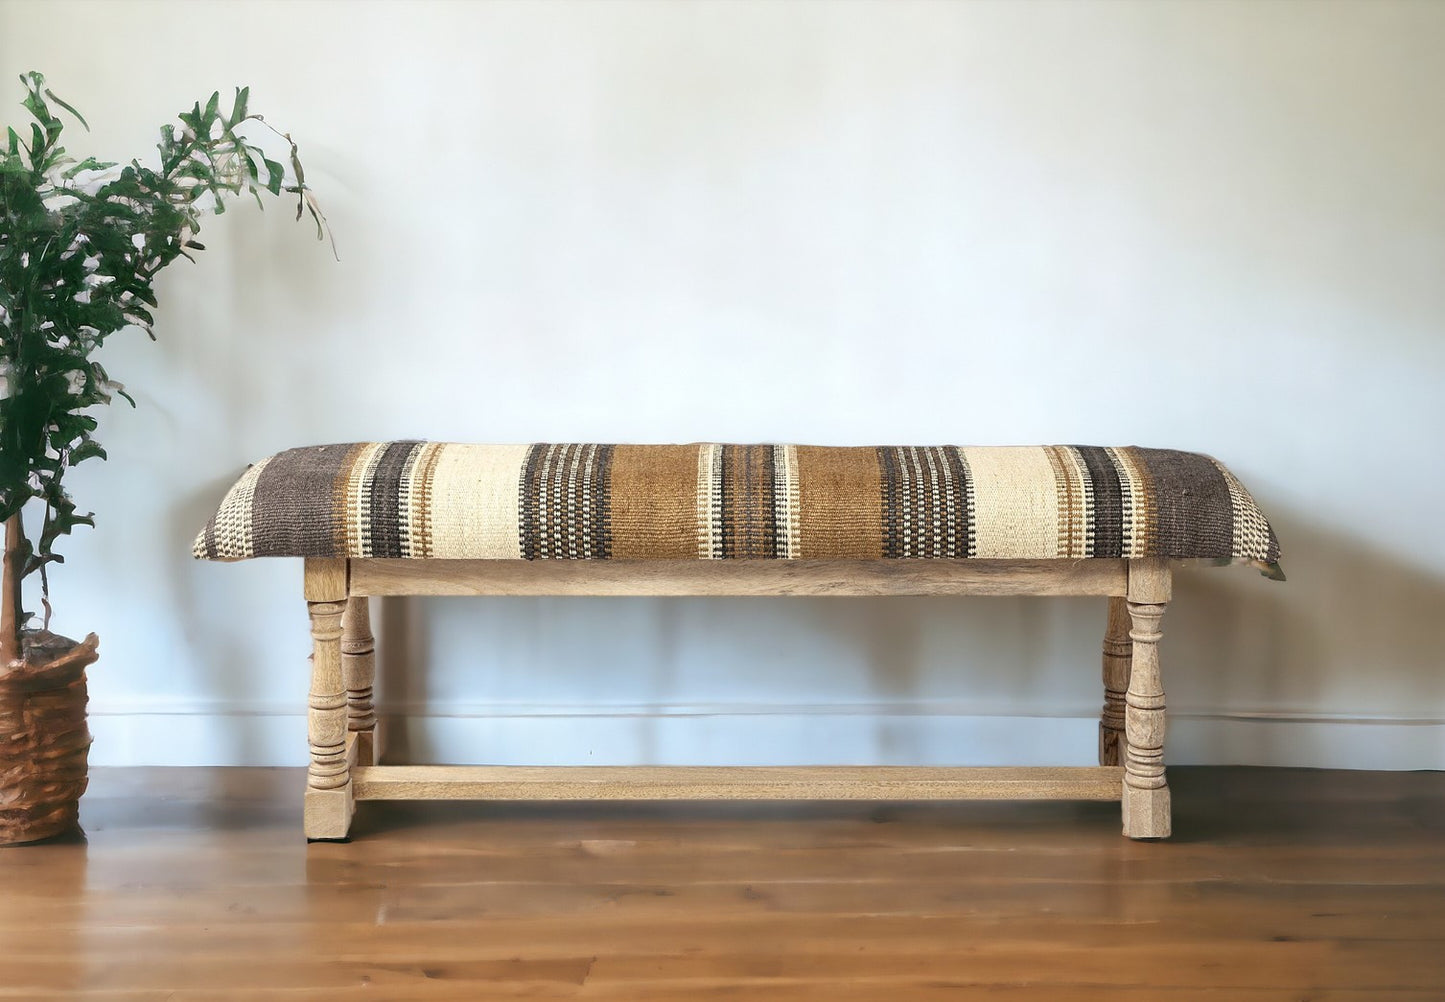 59" Beige and Gray and Brown Upholstered Jute Striped Bench